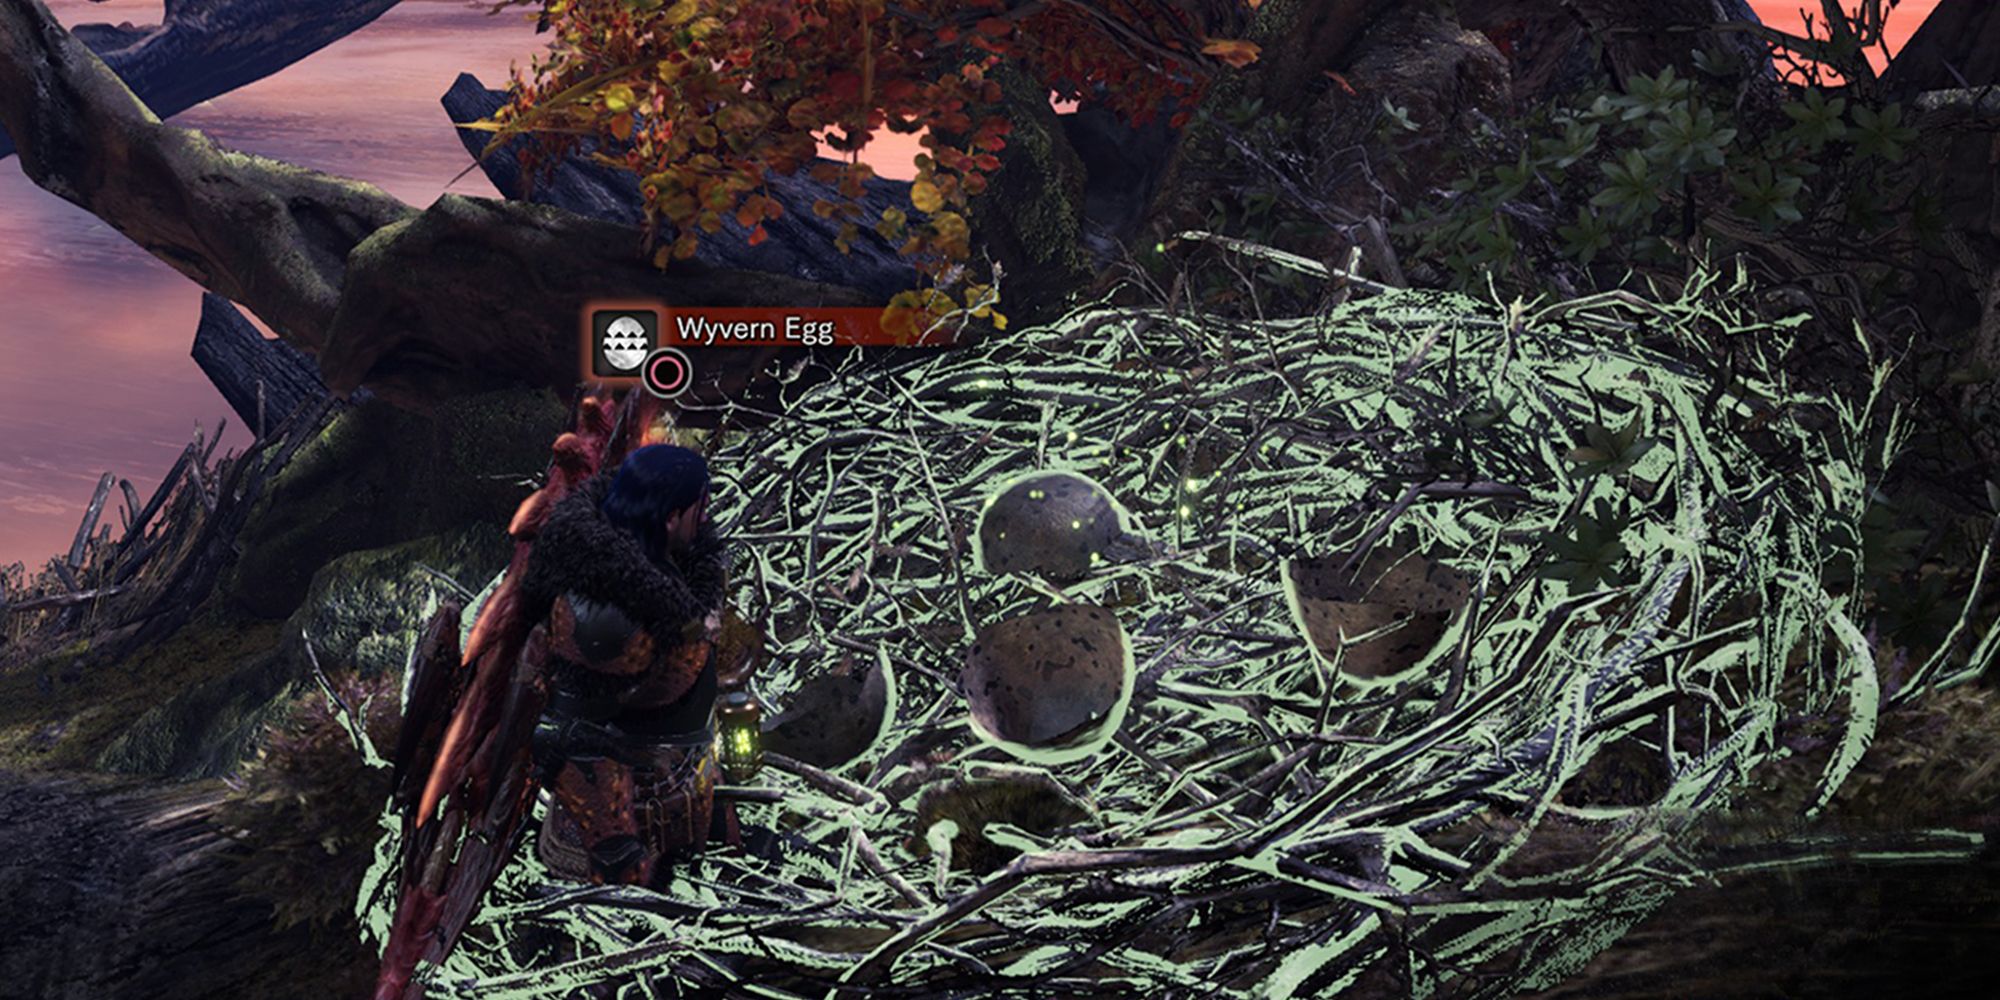 a nest containing wyvern eggs and a hunter inspecting it